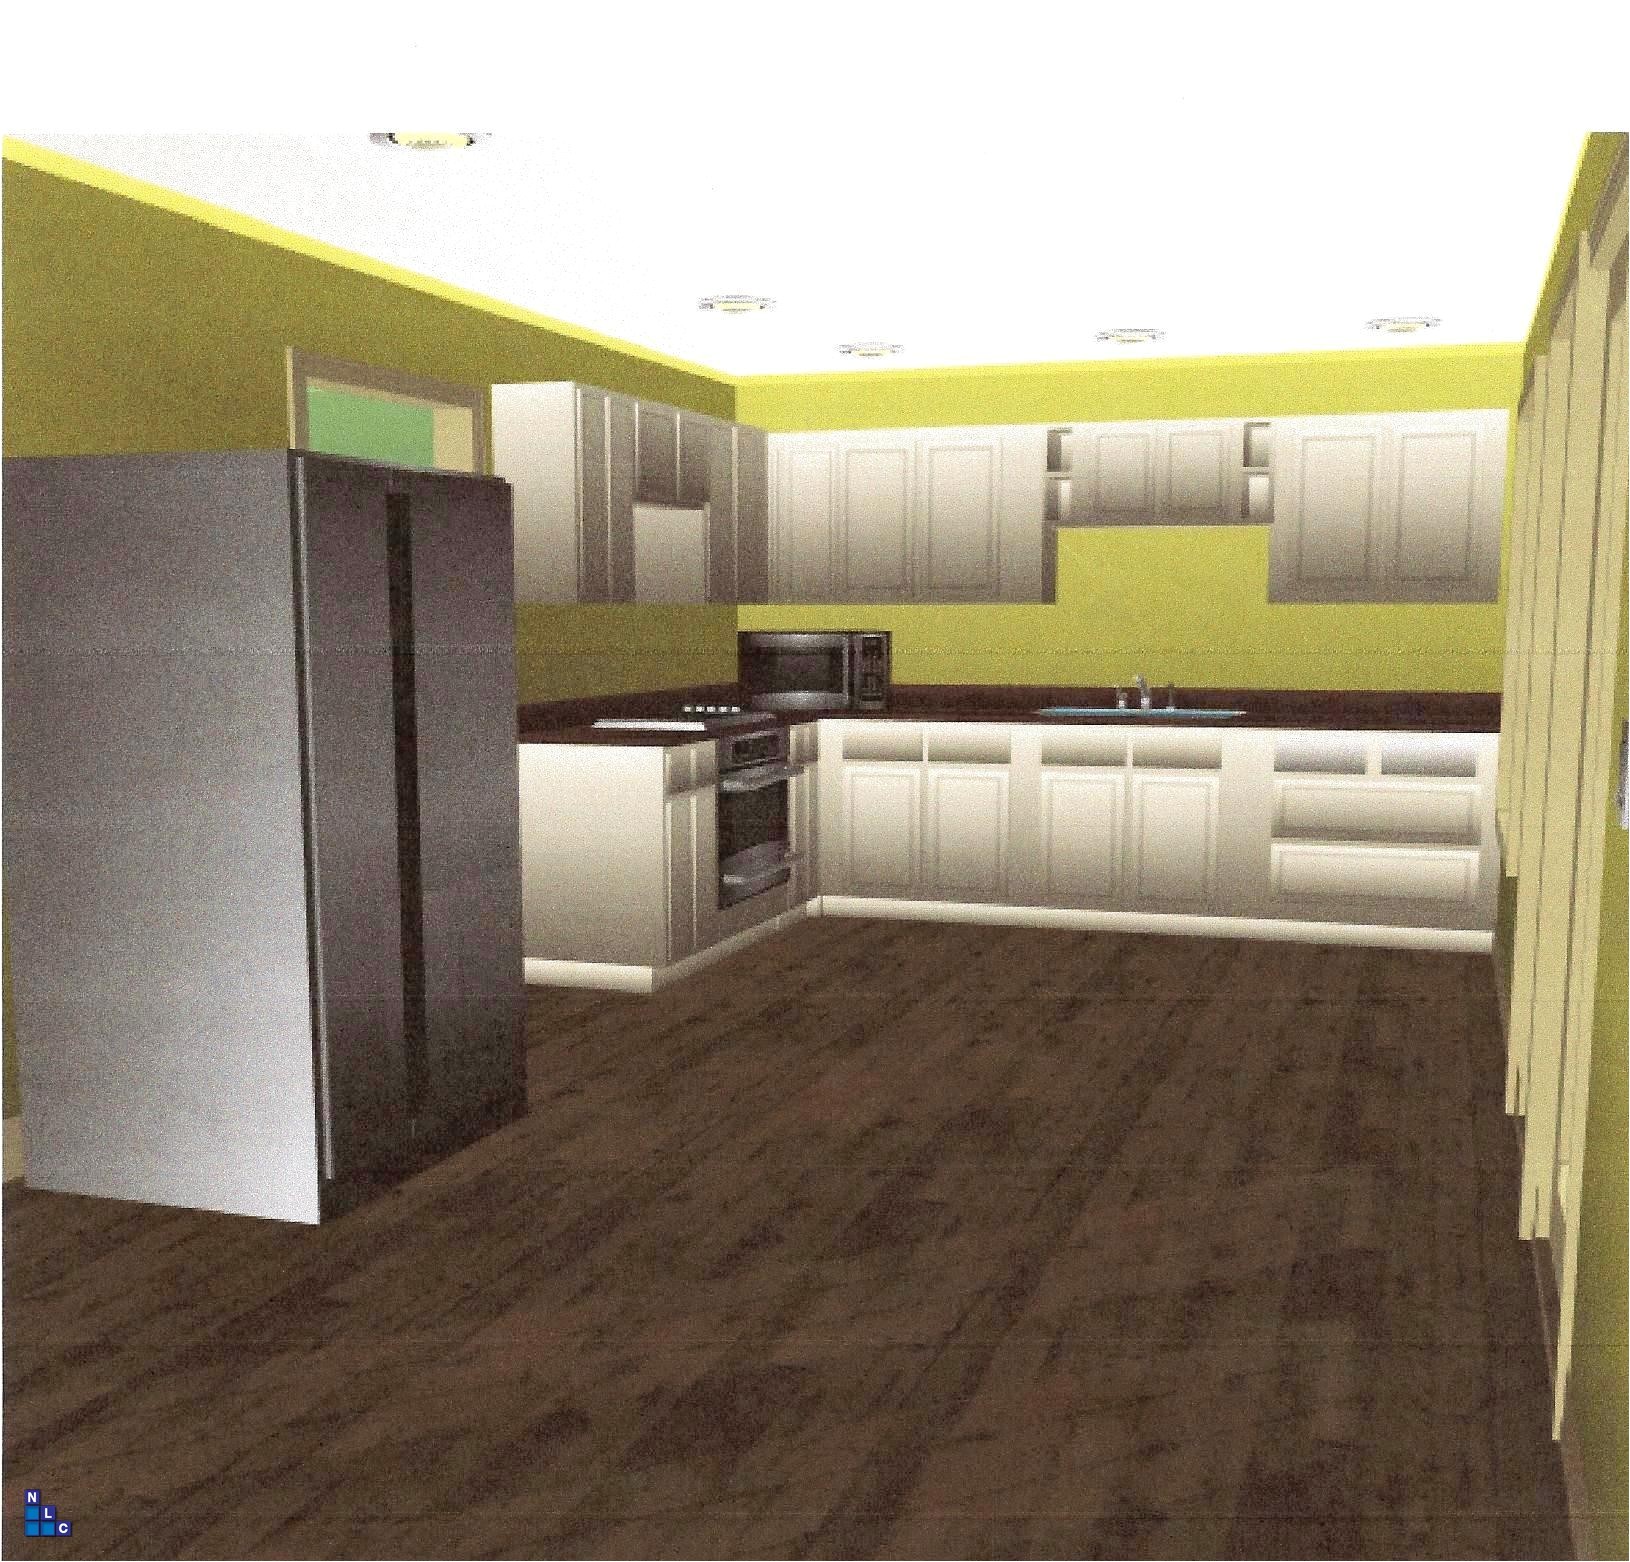 Home theater Planning tool Interior Virtual House Designing Games Free Gallery Of